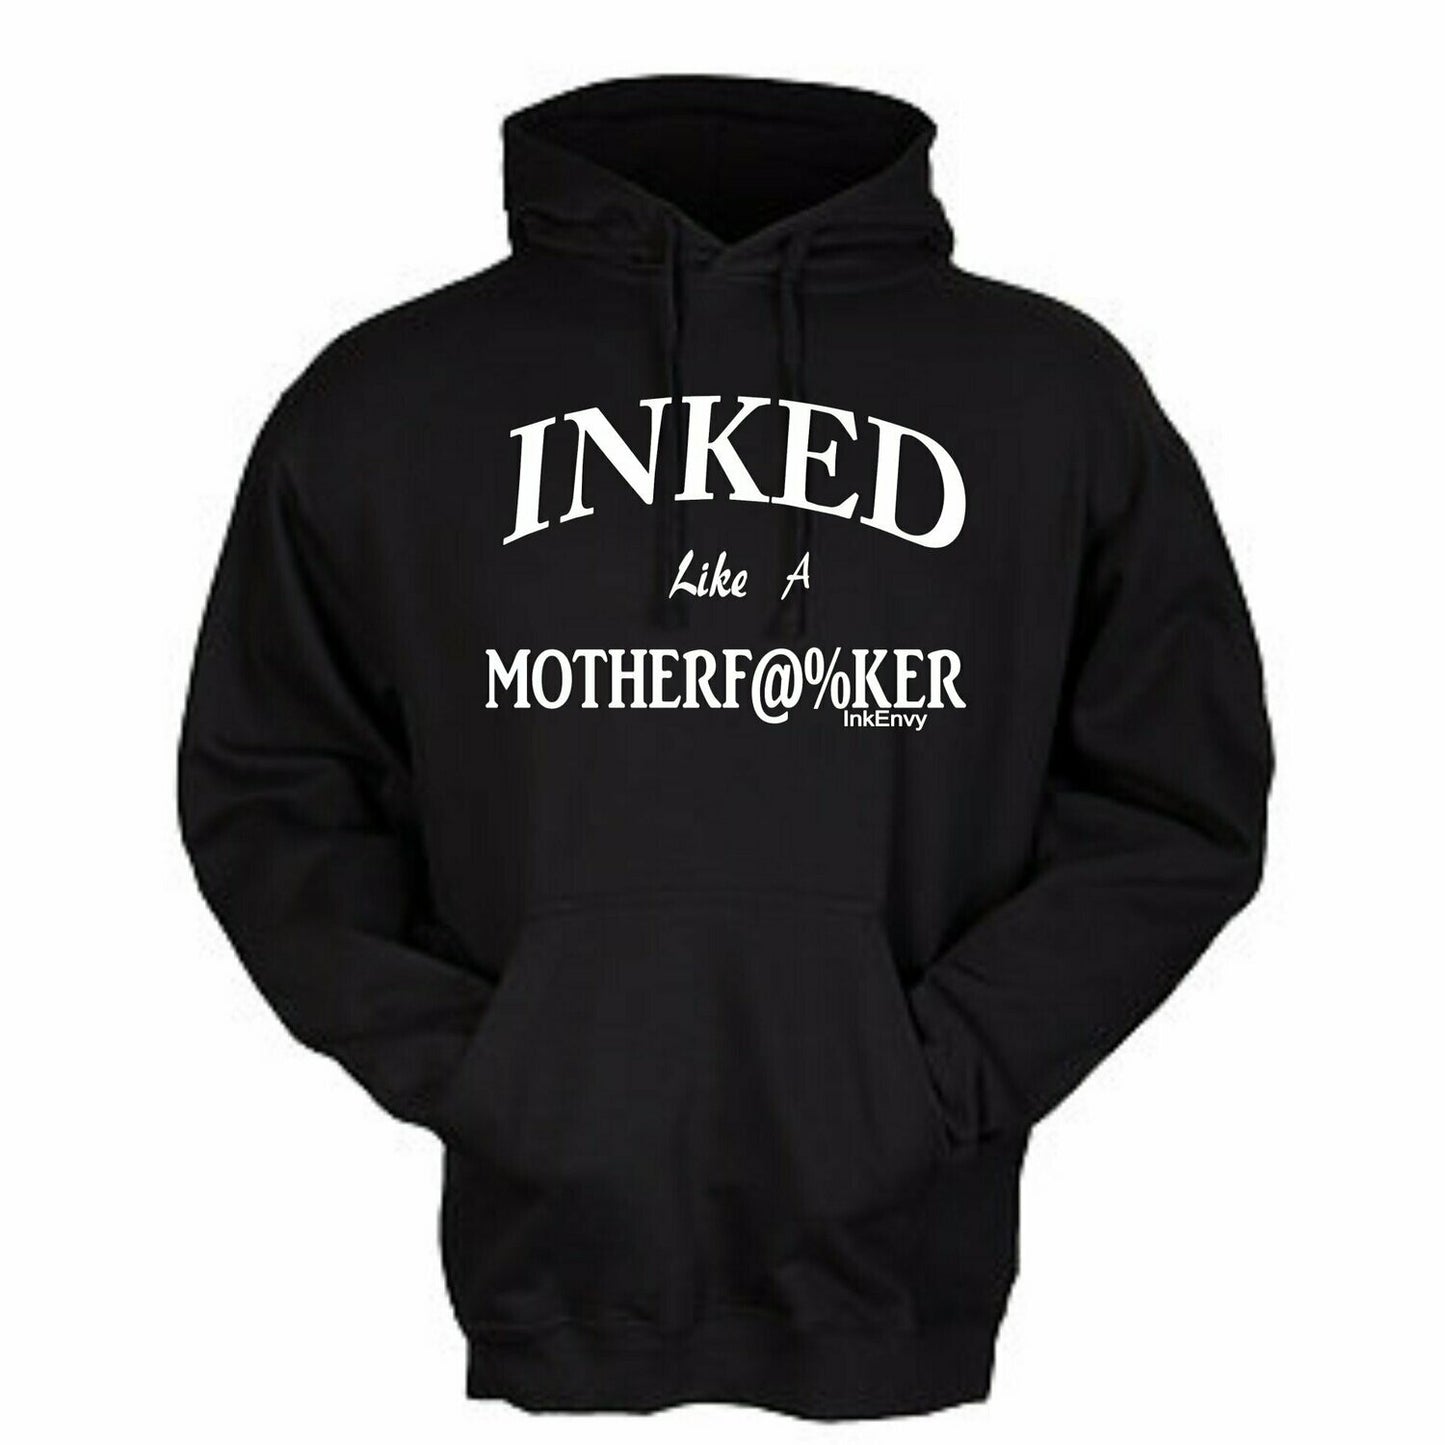 Inked like a MFer Black Midweight Hoodie